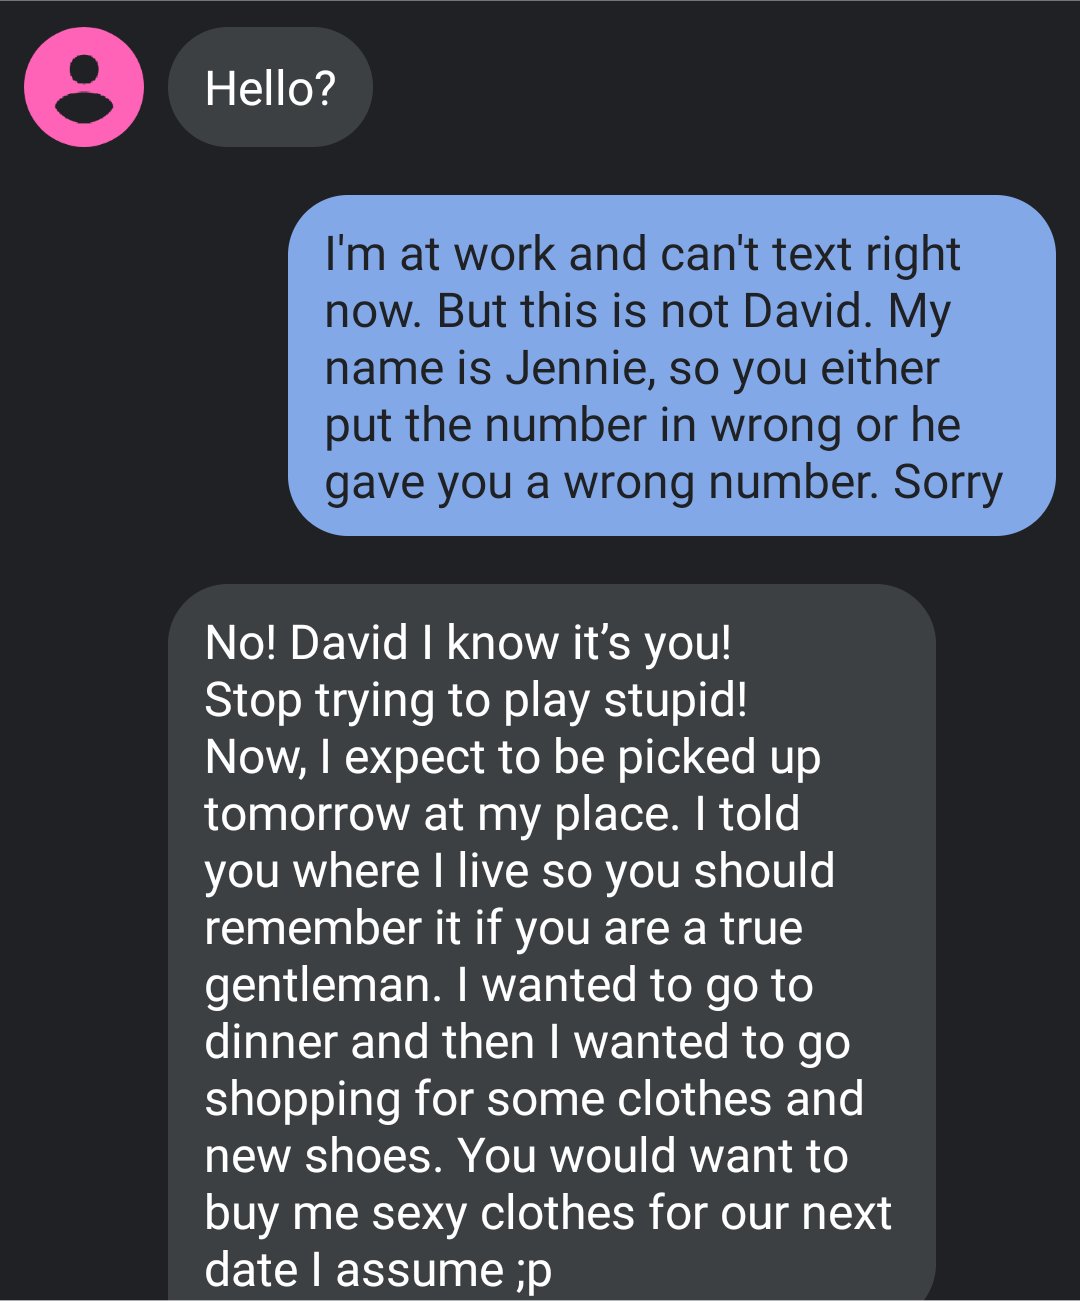 Hello? I'm at work and can't text right now. But this is not David. My name is Jennie, so you either put the number in wrong or he gave you a wrong number. Sorry No! David I know it's you! Stop trying to play stupid! Now, I expect to be picke